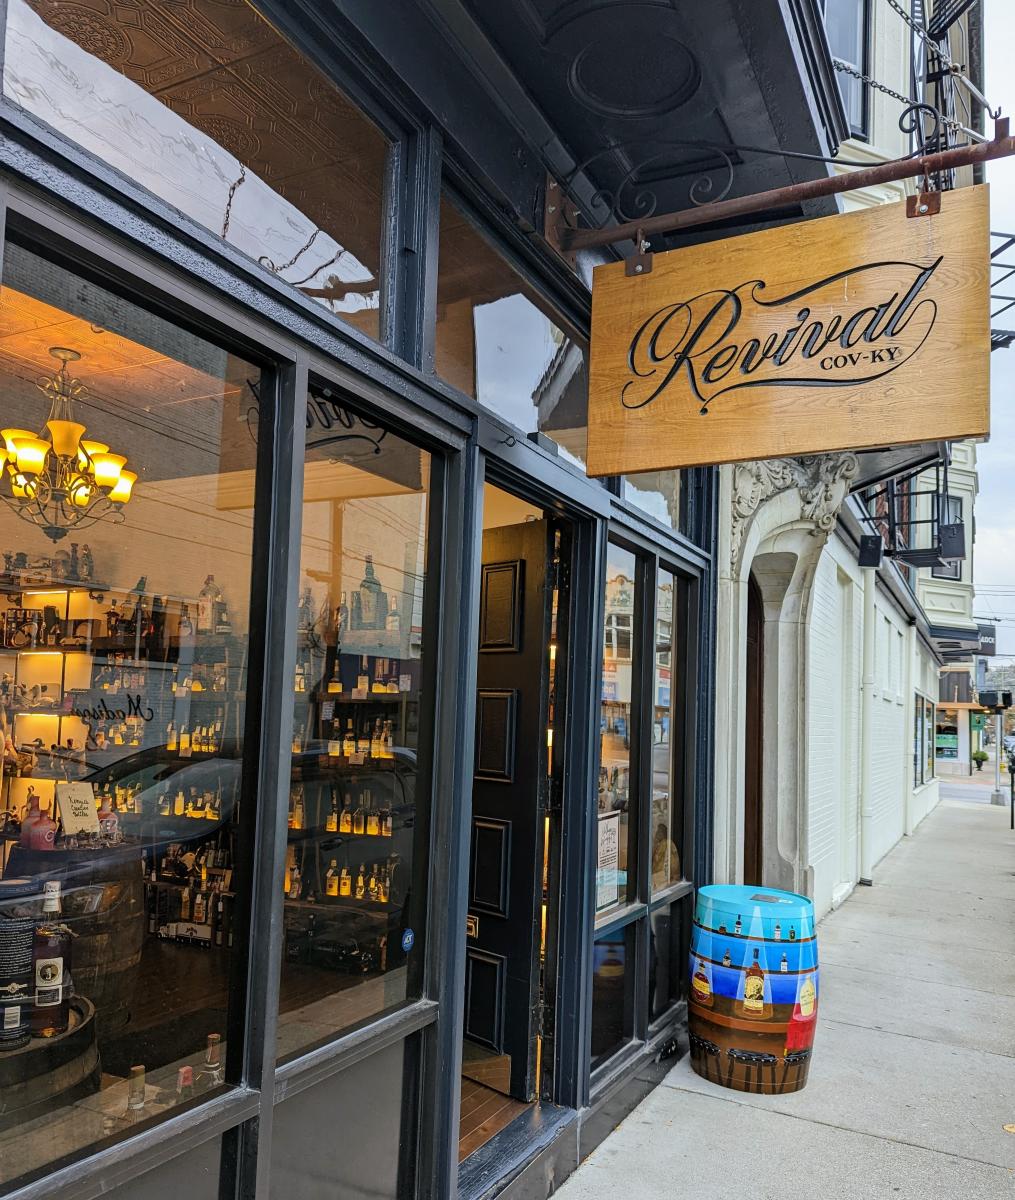 The glass windowed front of Revival Vintage Spirits with bourbon bottles visible through the windows and a wood sign with Revival written on it hanging over the door